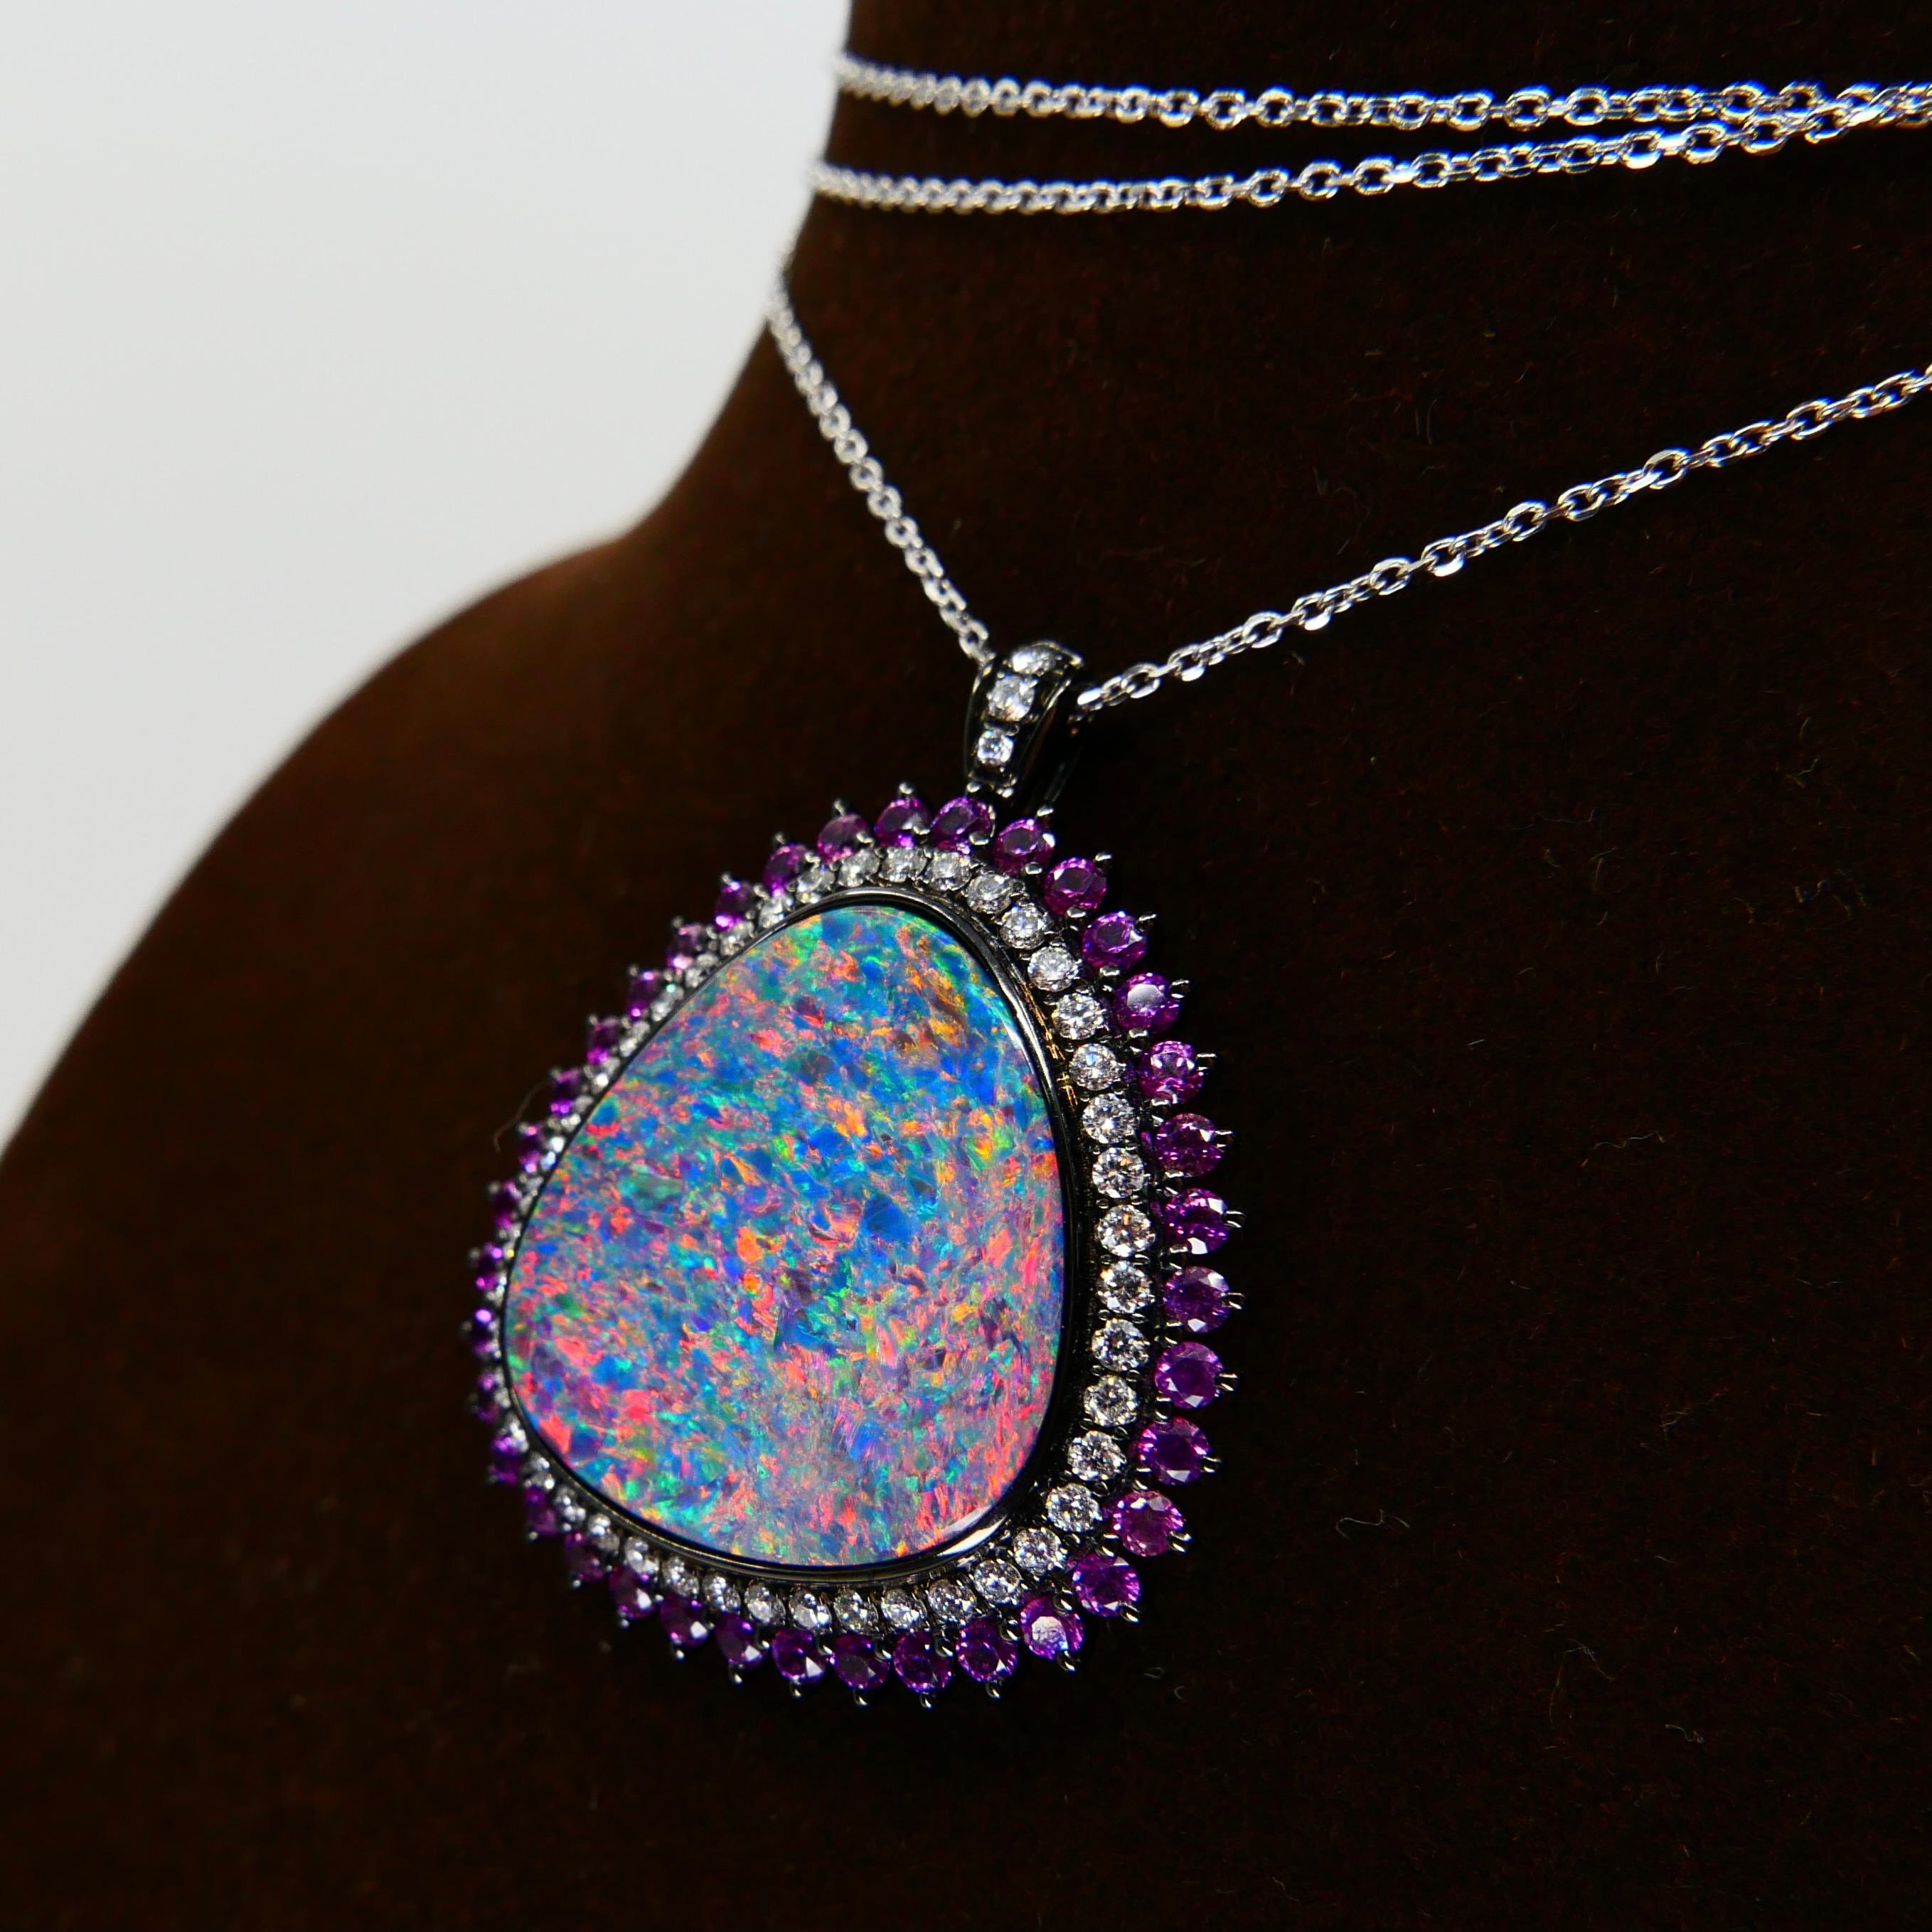 Rough Cut 7.84 Cts Au Opal, Pink Sapphire & Diamond Ring Pendant, Superb Play of Colors For Sale